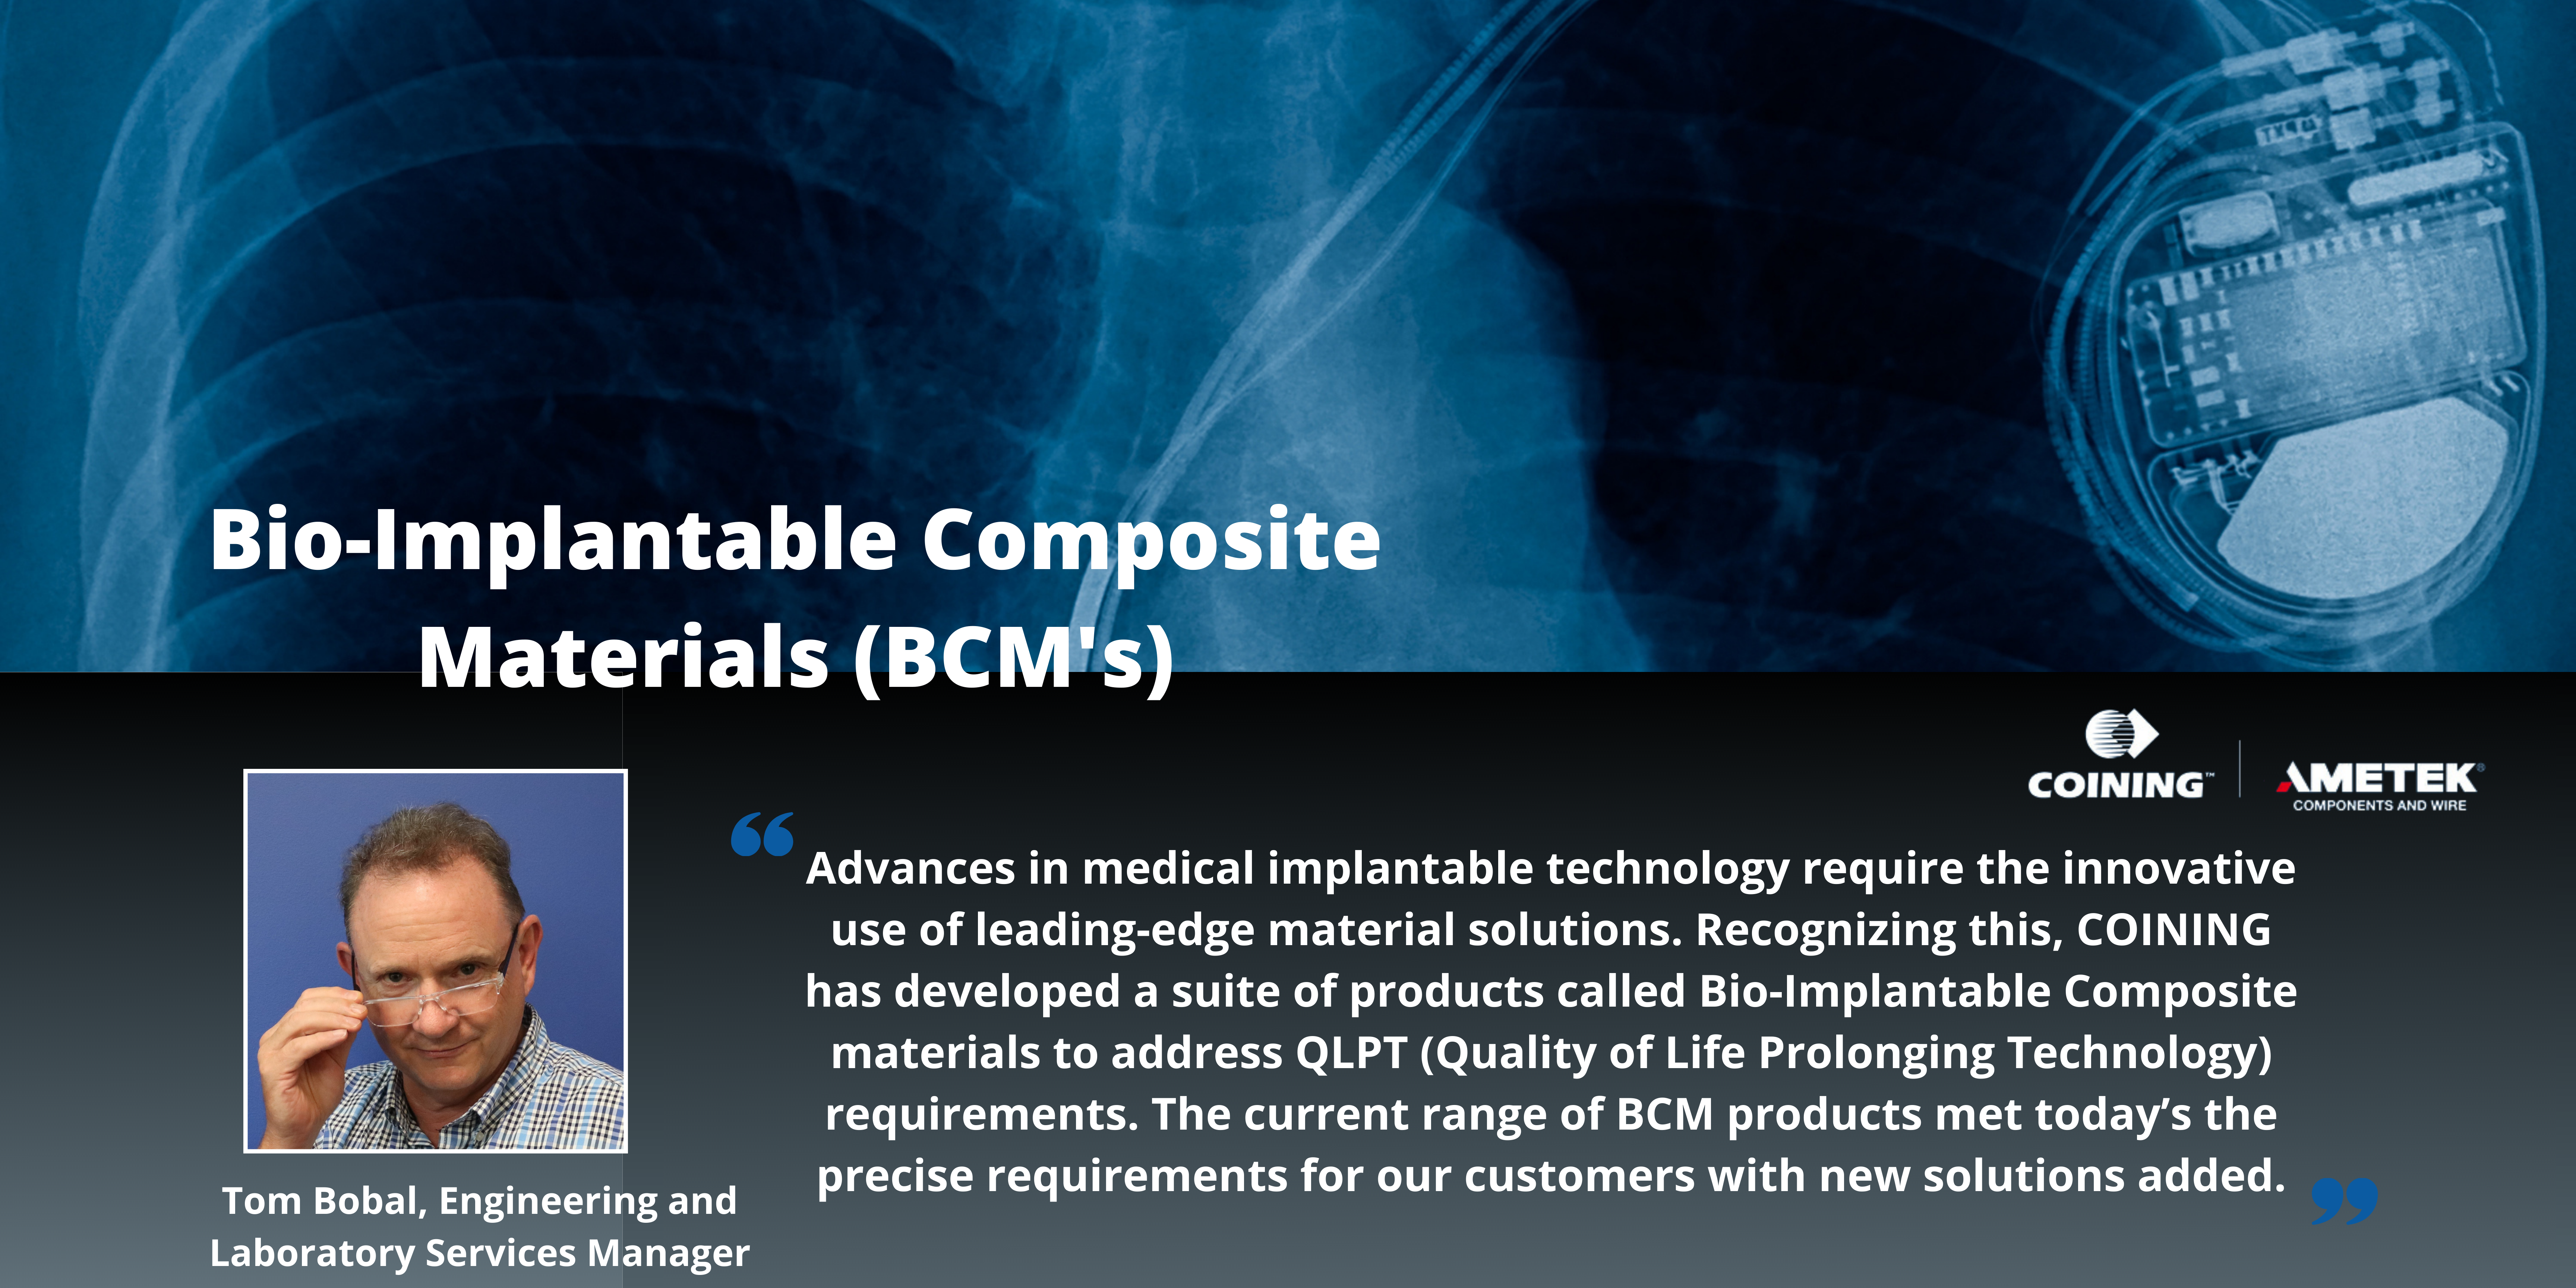 COINING Develops New Bio-Implantable Composite Materials to Improve Performance and Reliability of Implantable Medical Devices